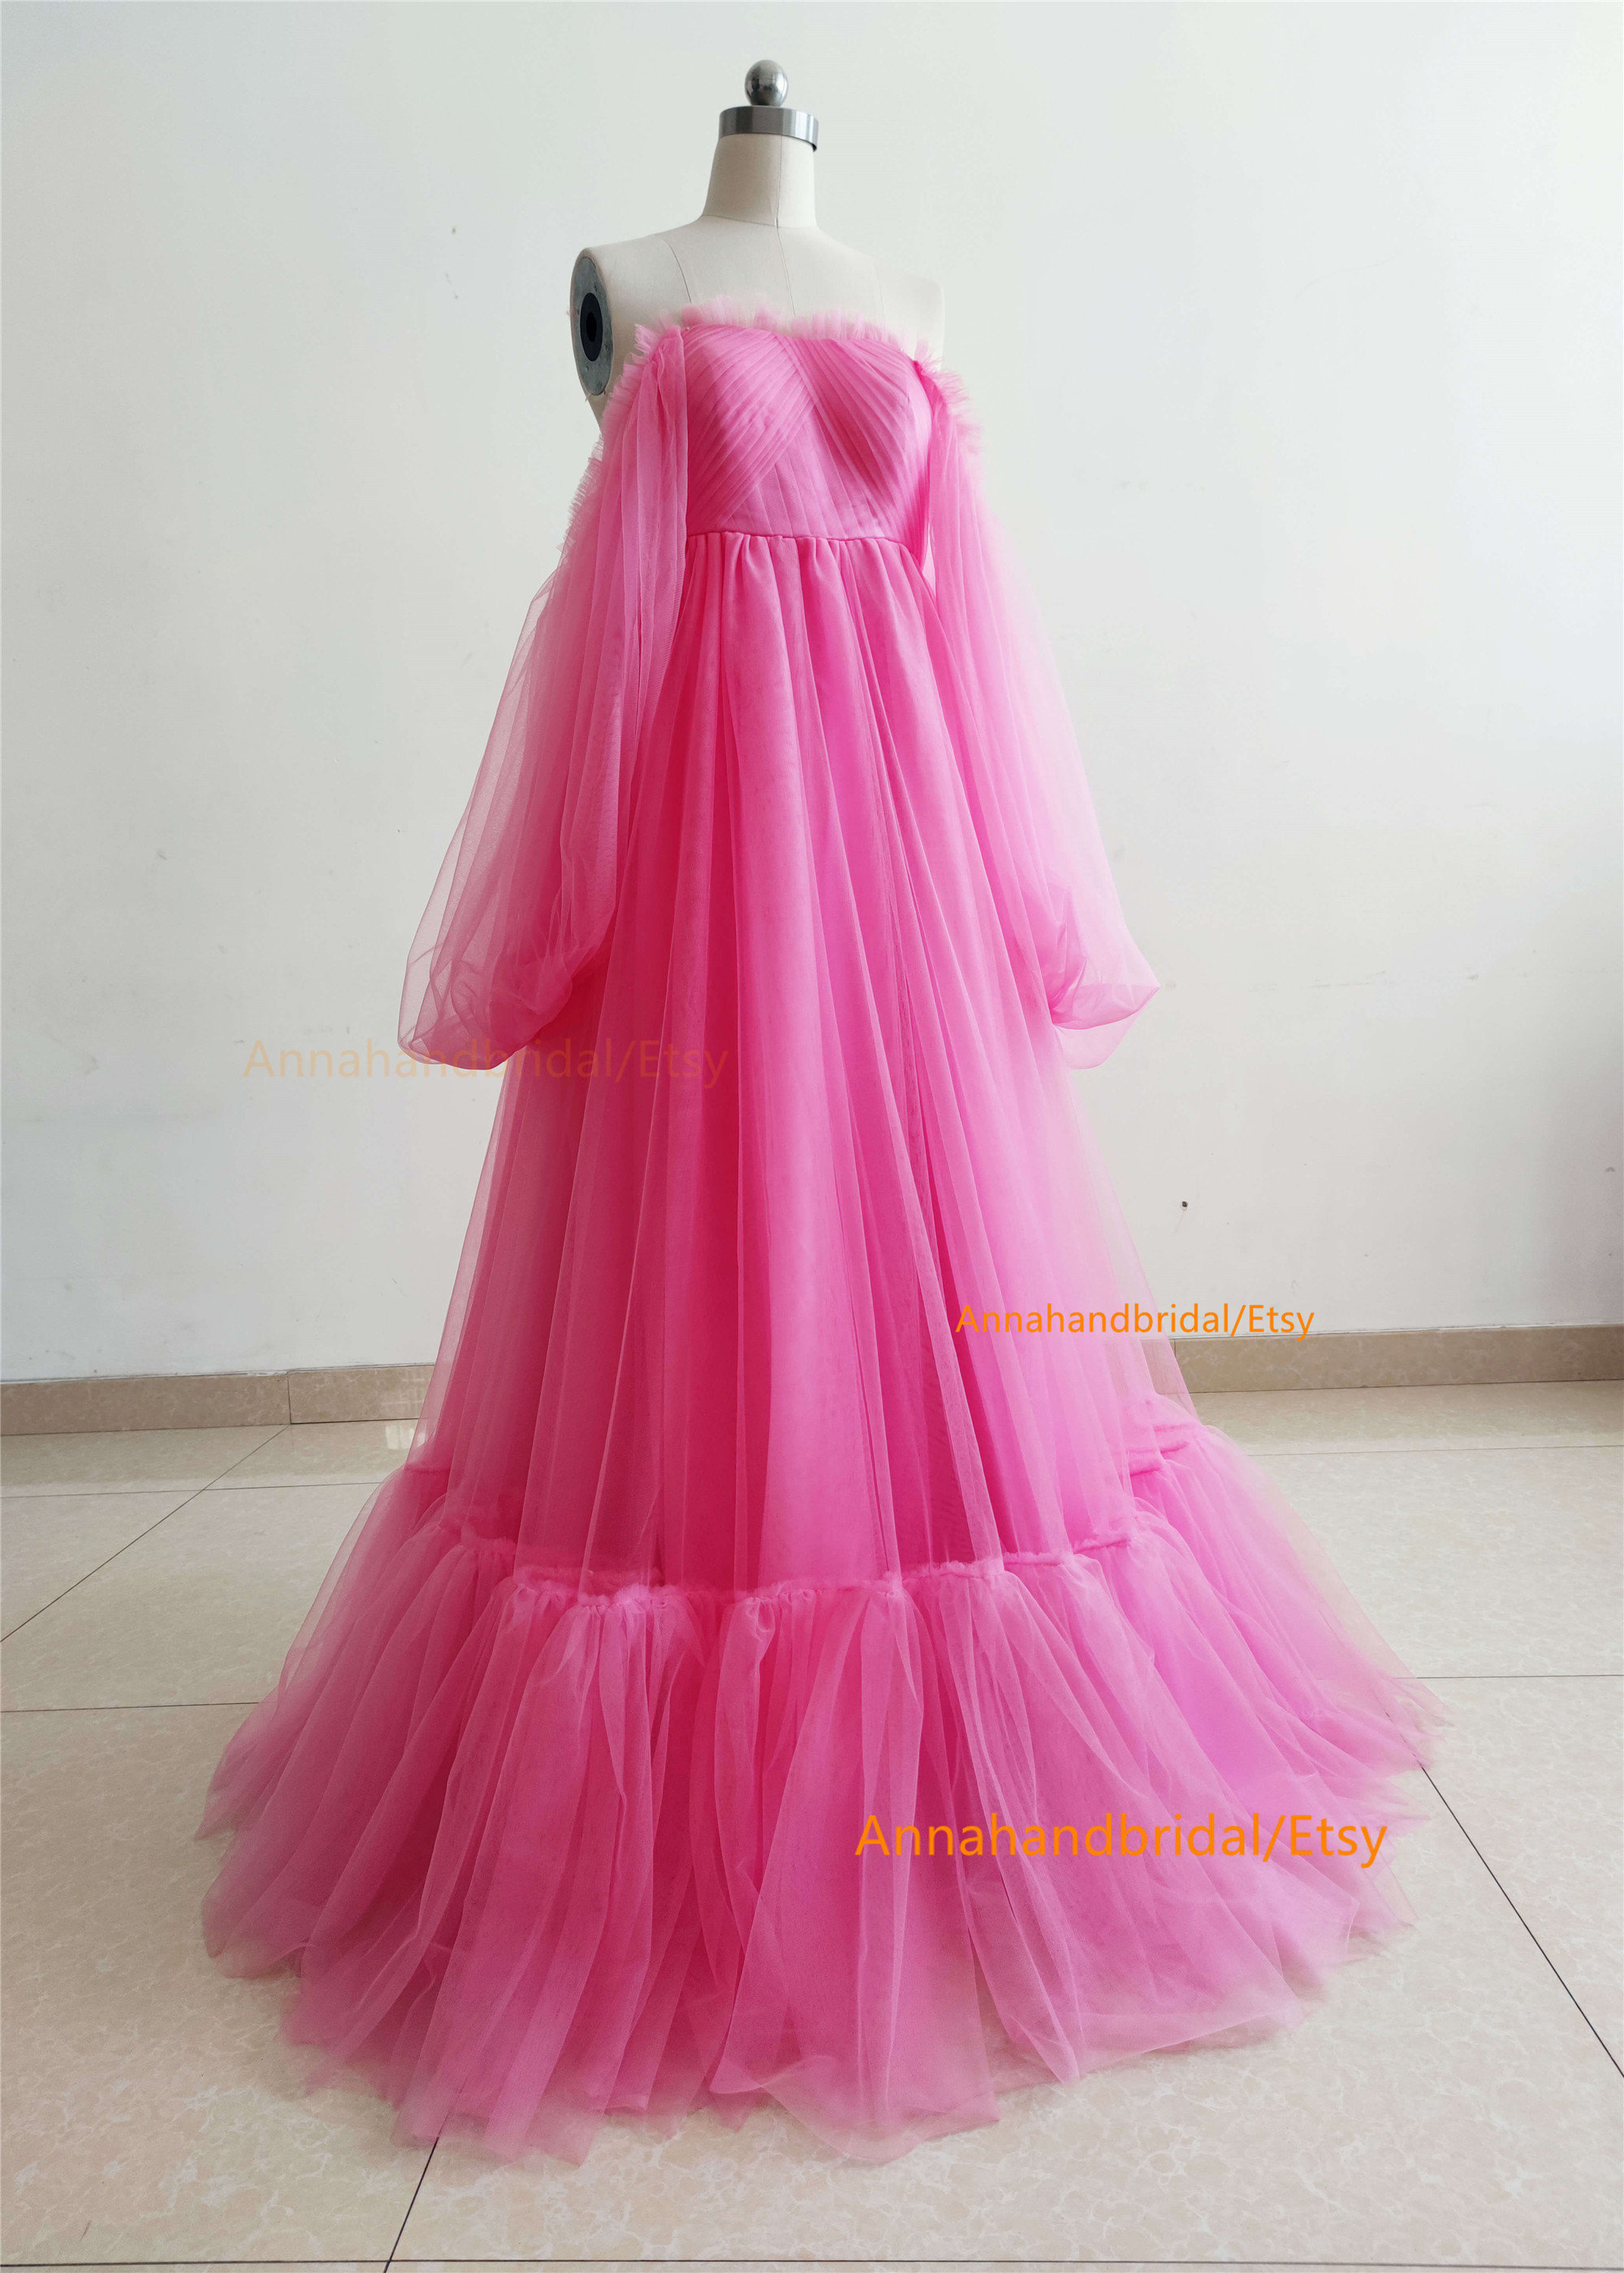 Rainbow Dress Fluffy Tulle Dress Photoshoot Dress Flowing Gown